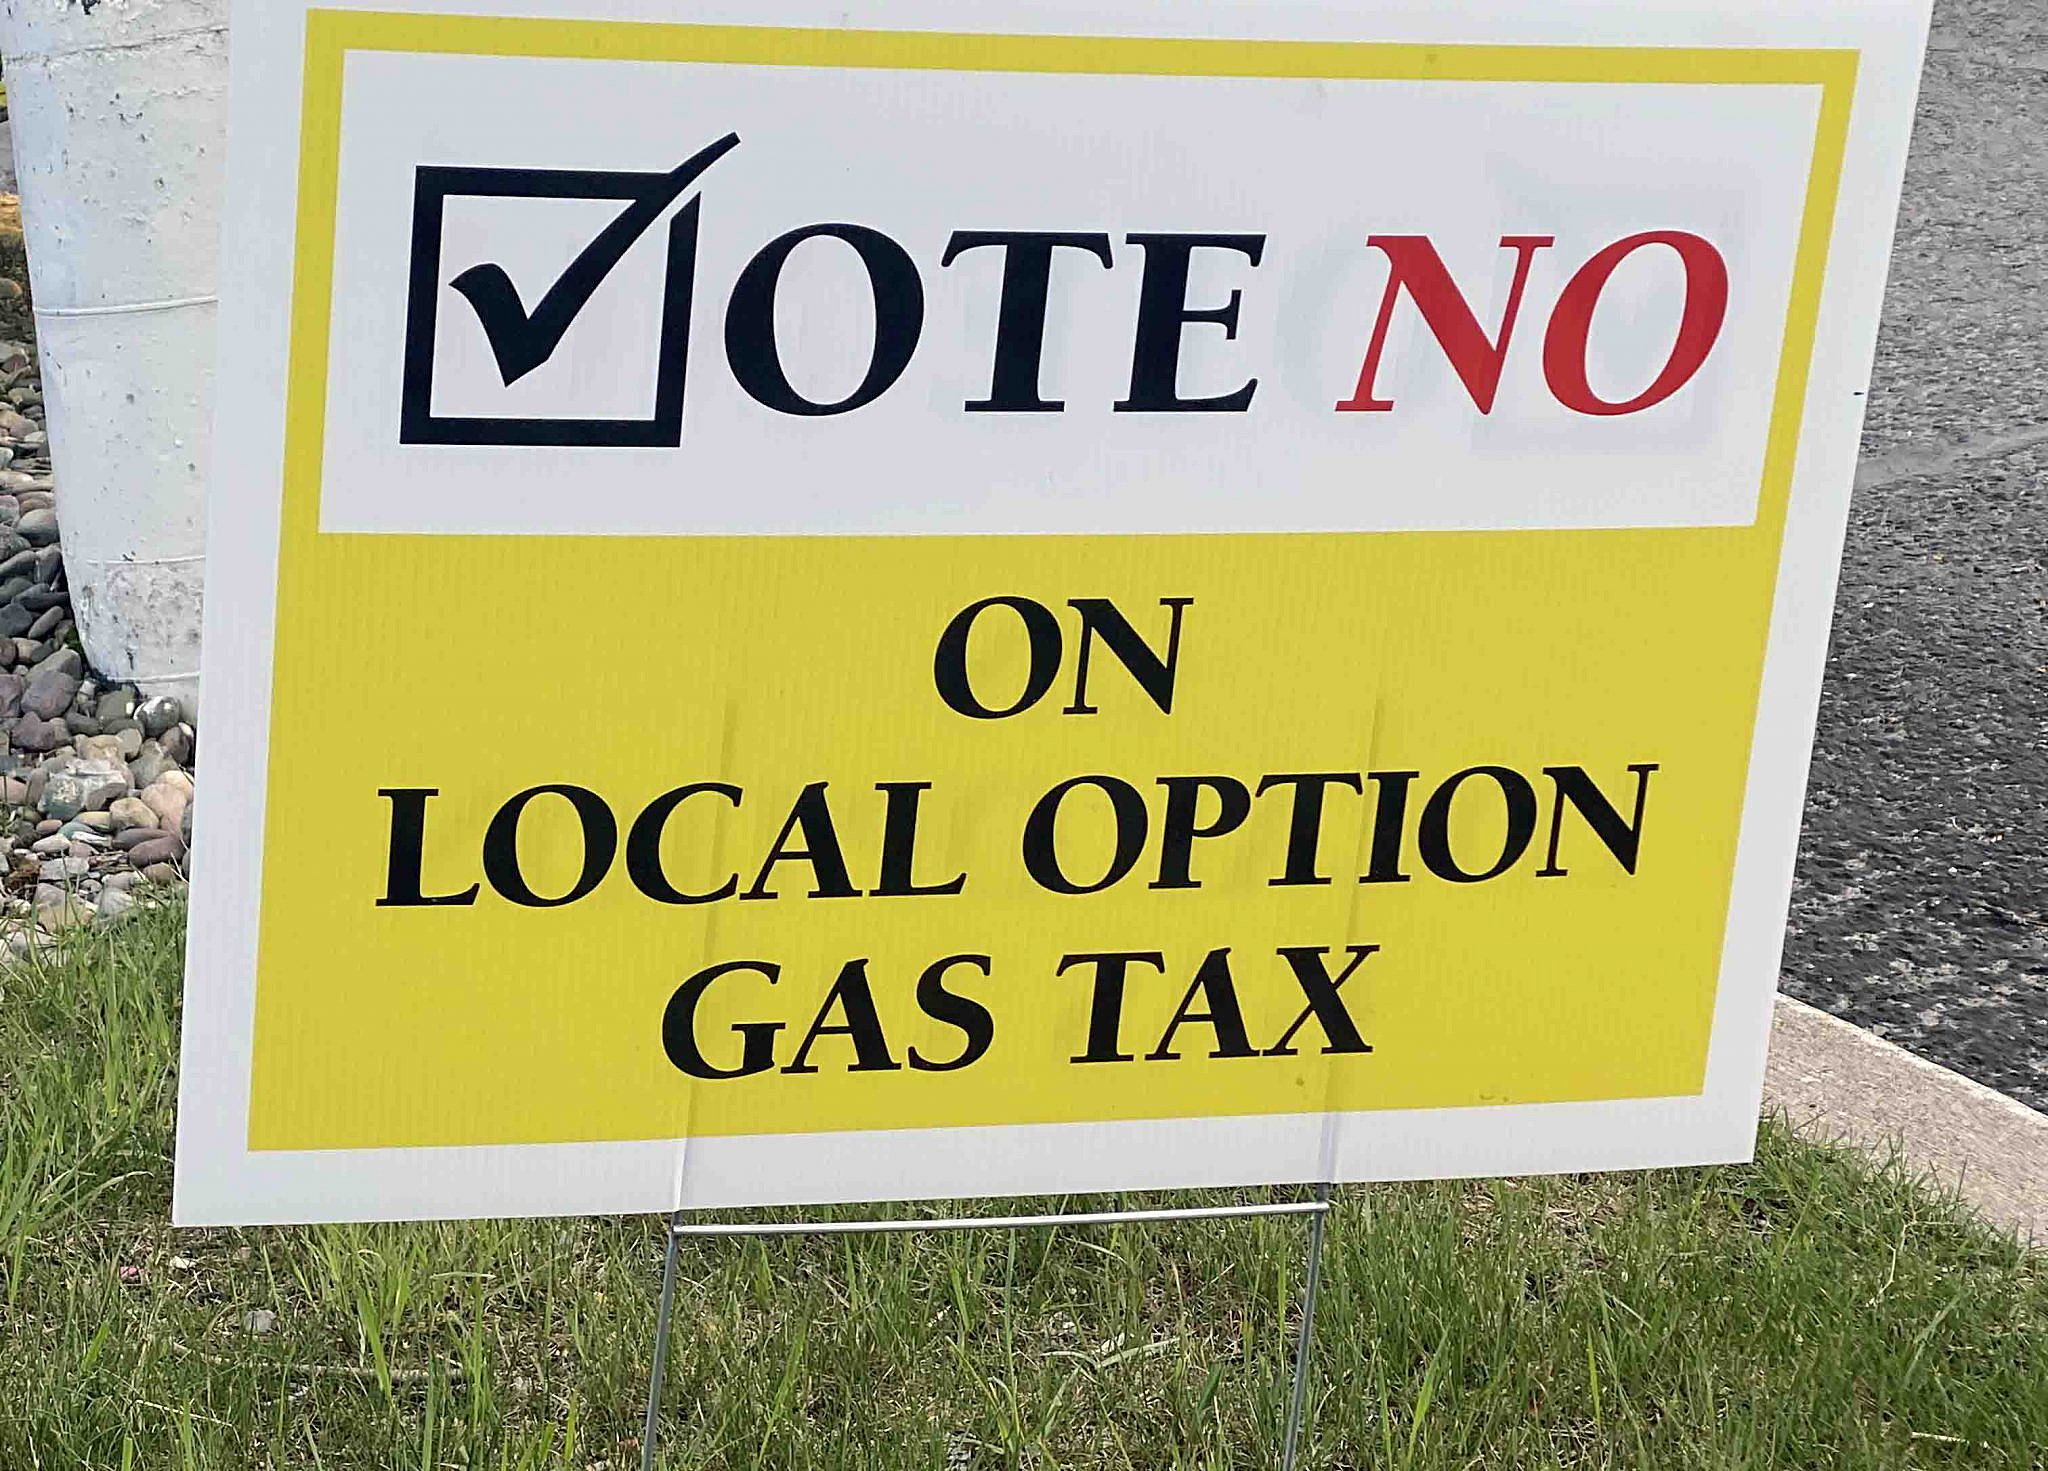 Campaign posters opposing 2cent fuel tax prompt complaint to Montana